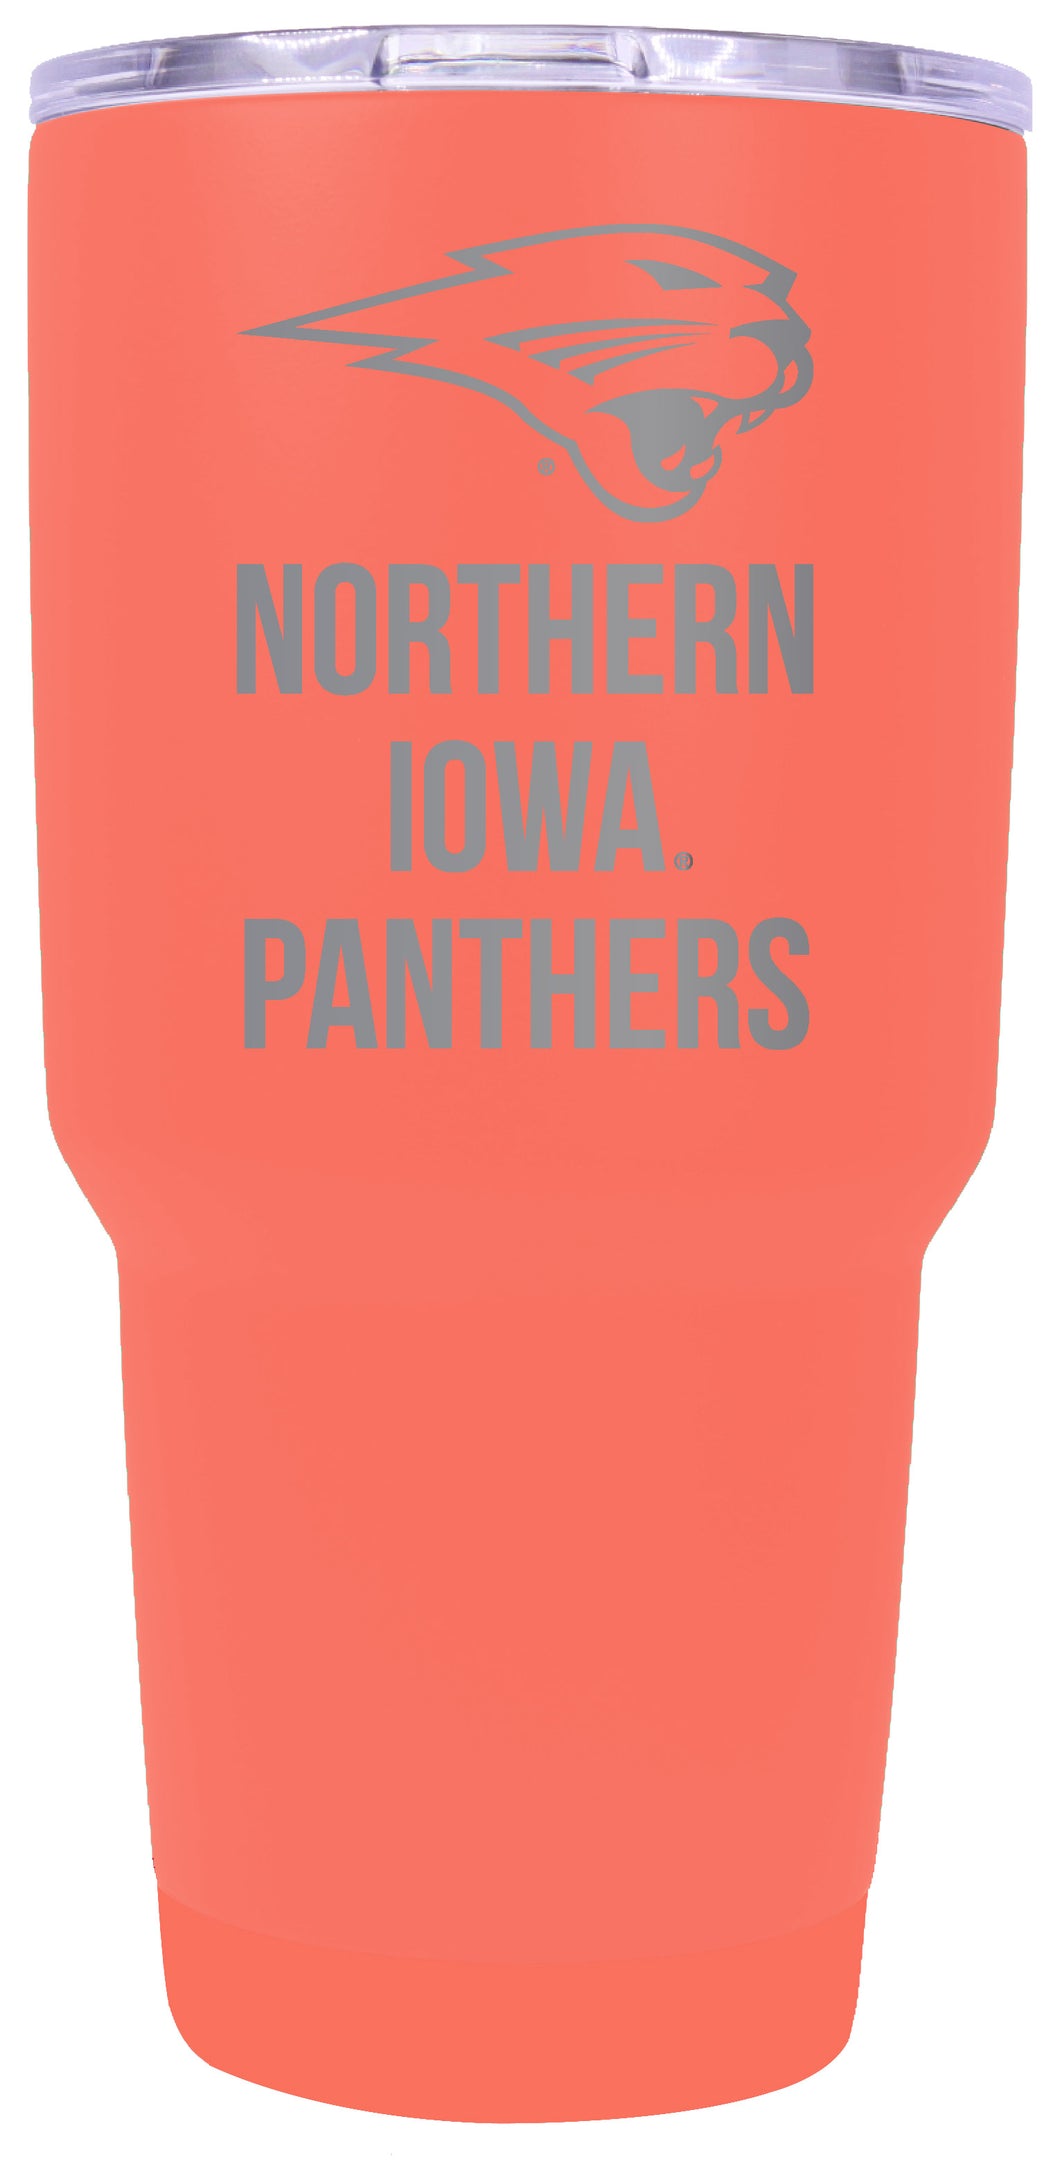 Northern Iowa Panthers Premium Laser Engraved Tumbler - 24oz Stainless Steel Insulated Mug Choose Your Color.